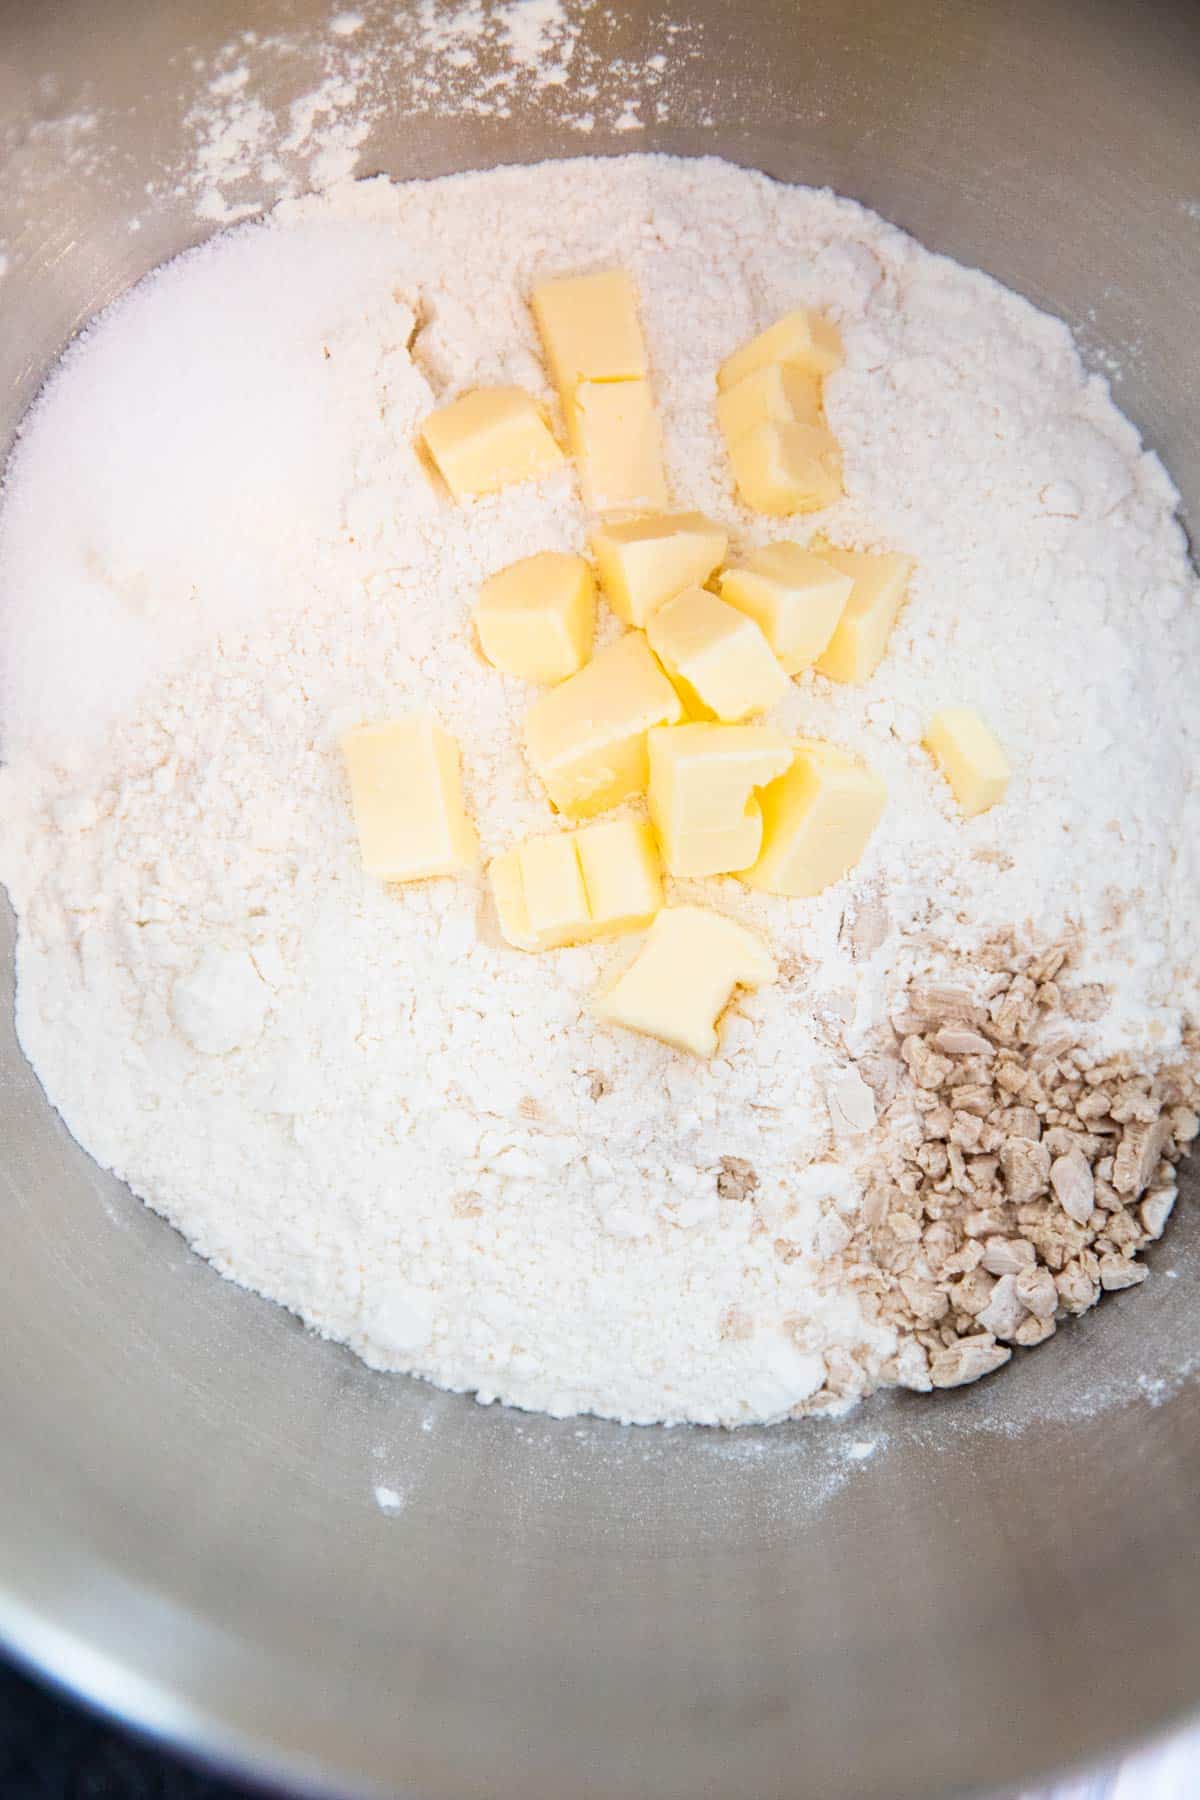 top down view of bowl with flour, yeast and butter